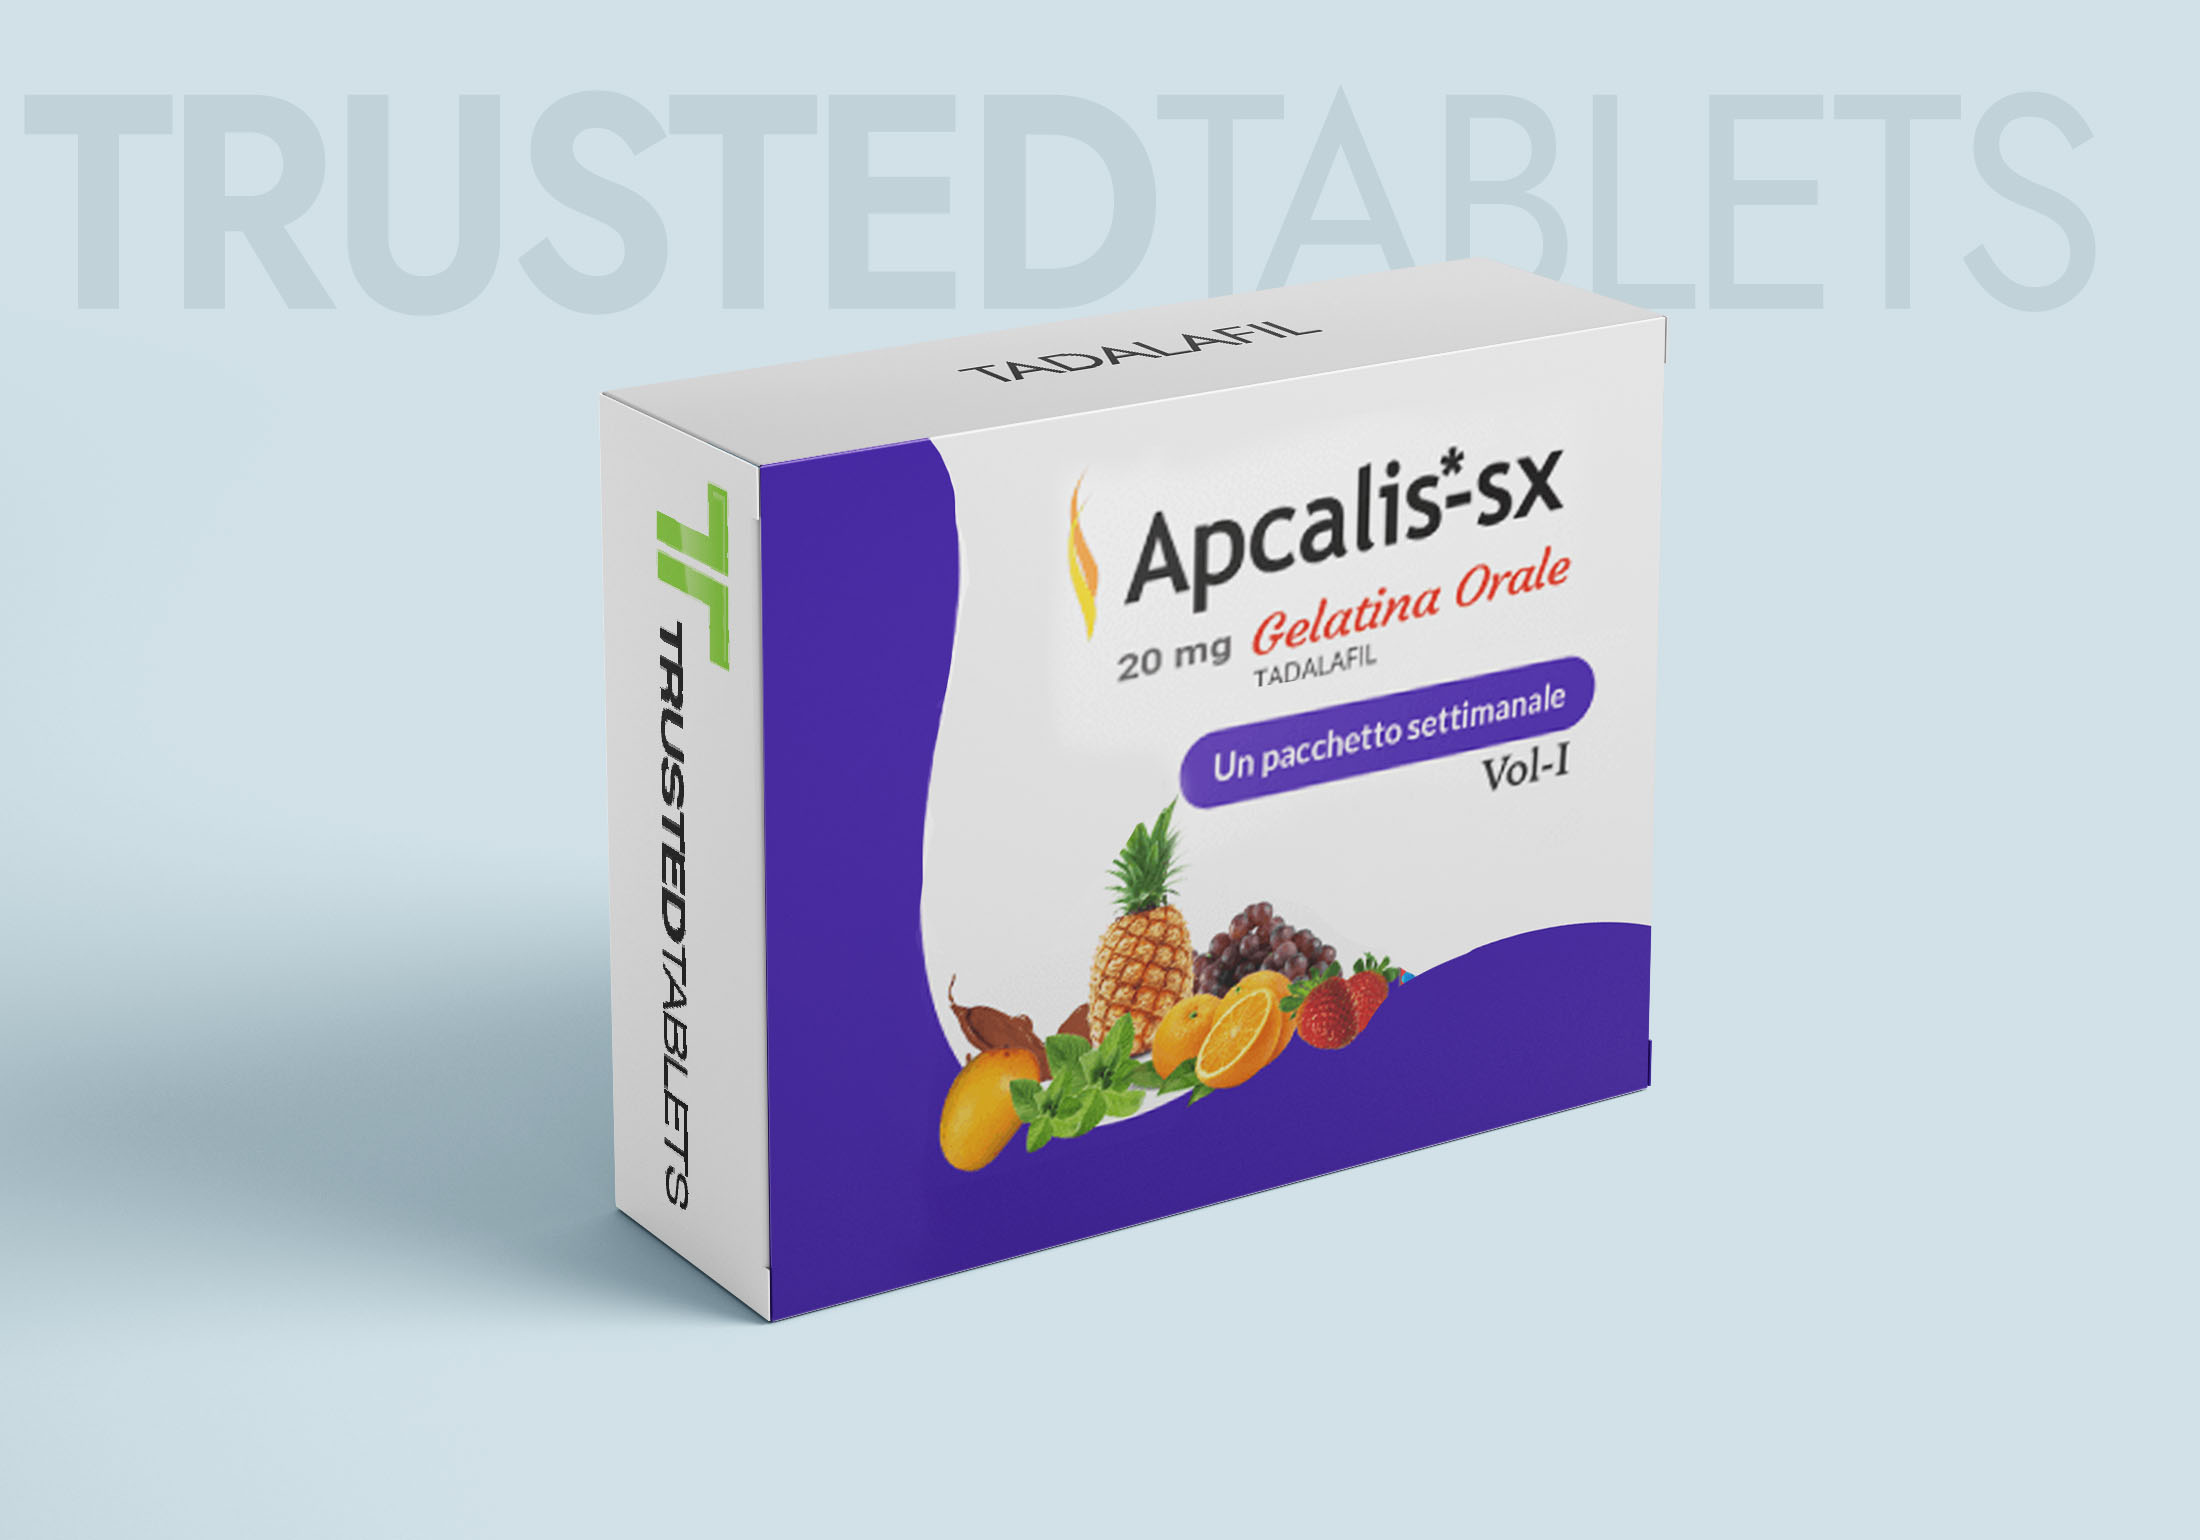 Cialis Oral Jelly TrustedTablets